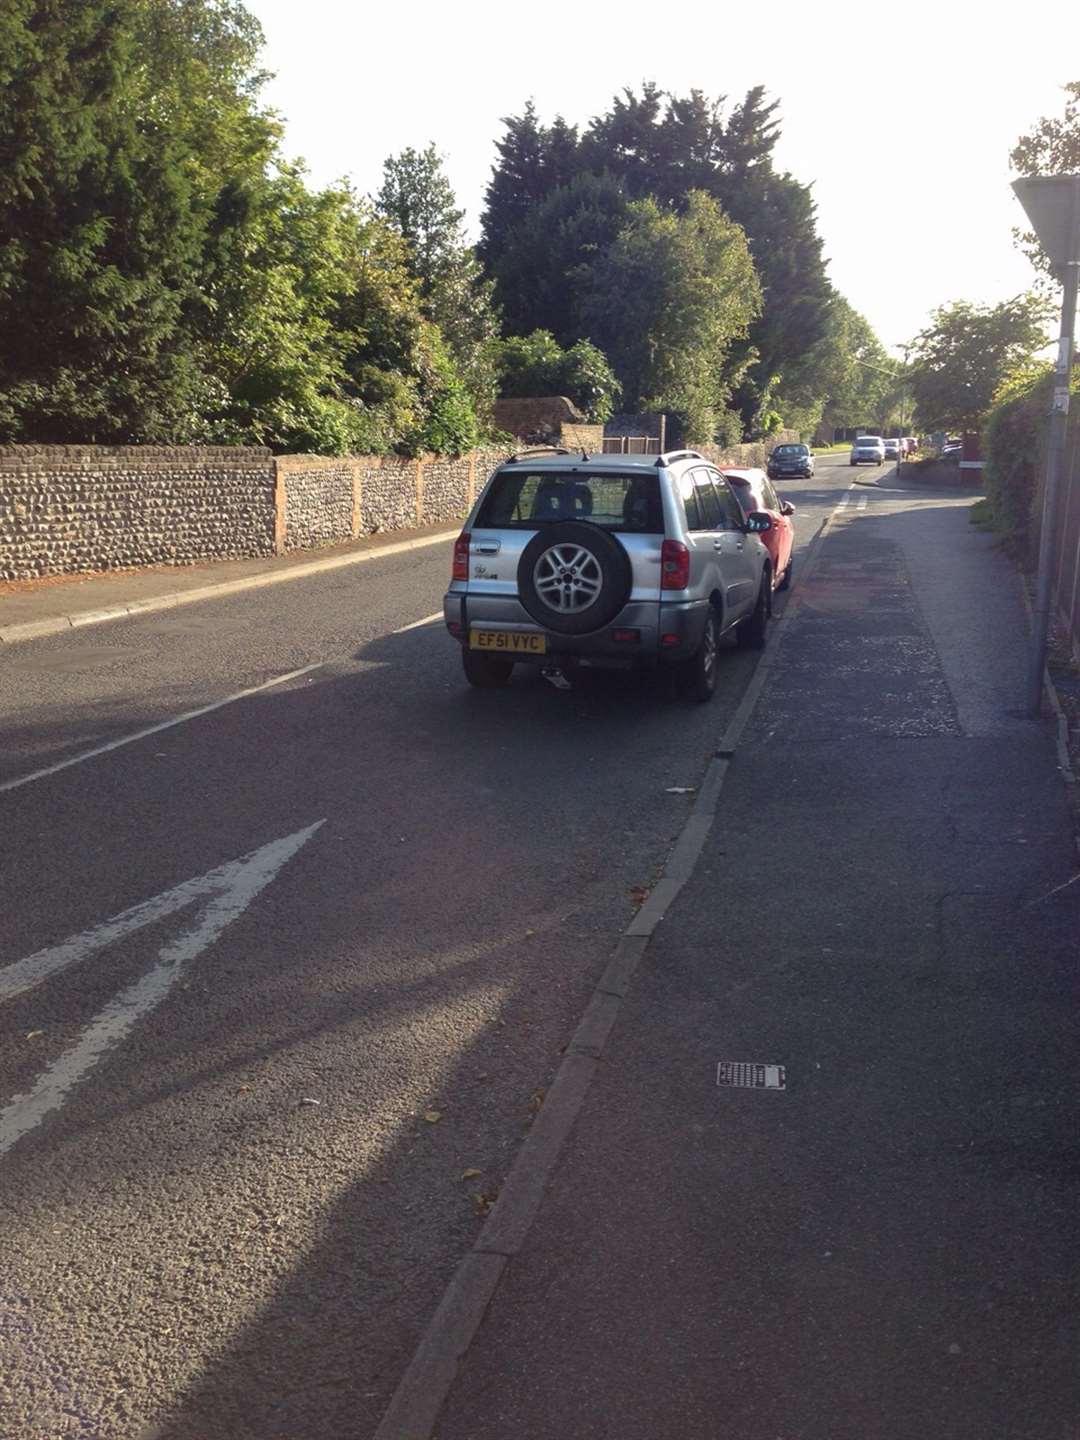 Parking in St Bart's Road in Sandwich is causing a hazard to other motorists